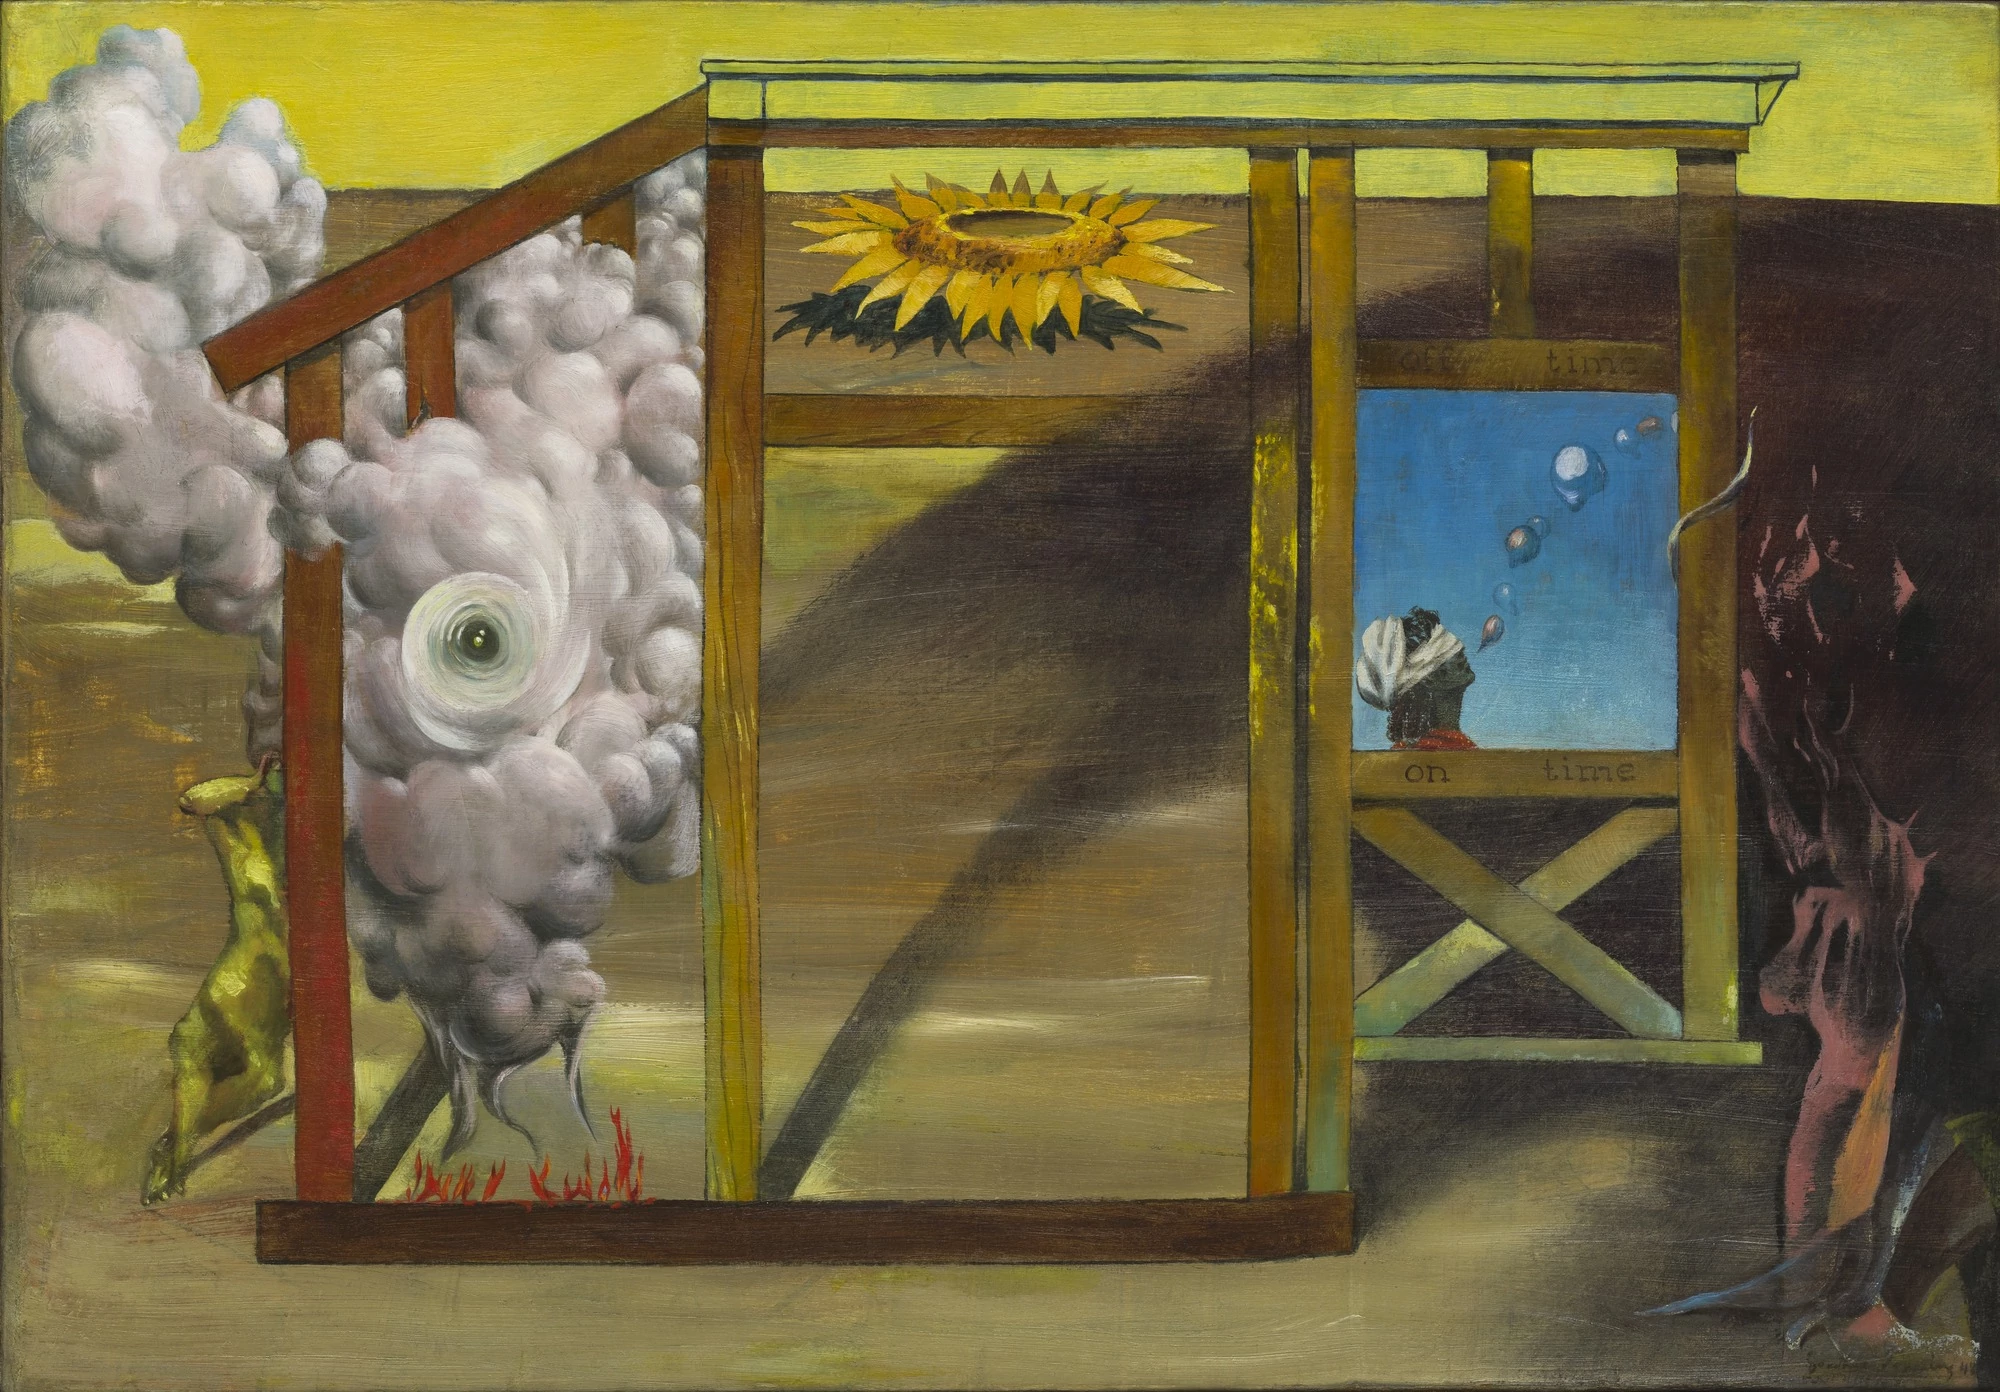 On Time Off Time, Dorothea Tanning